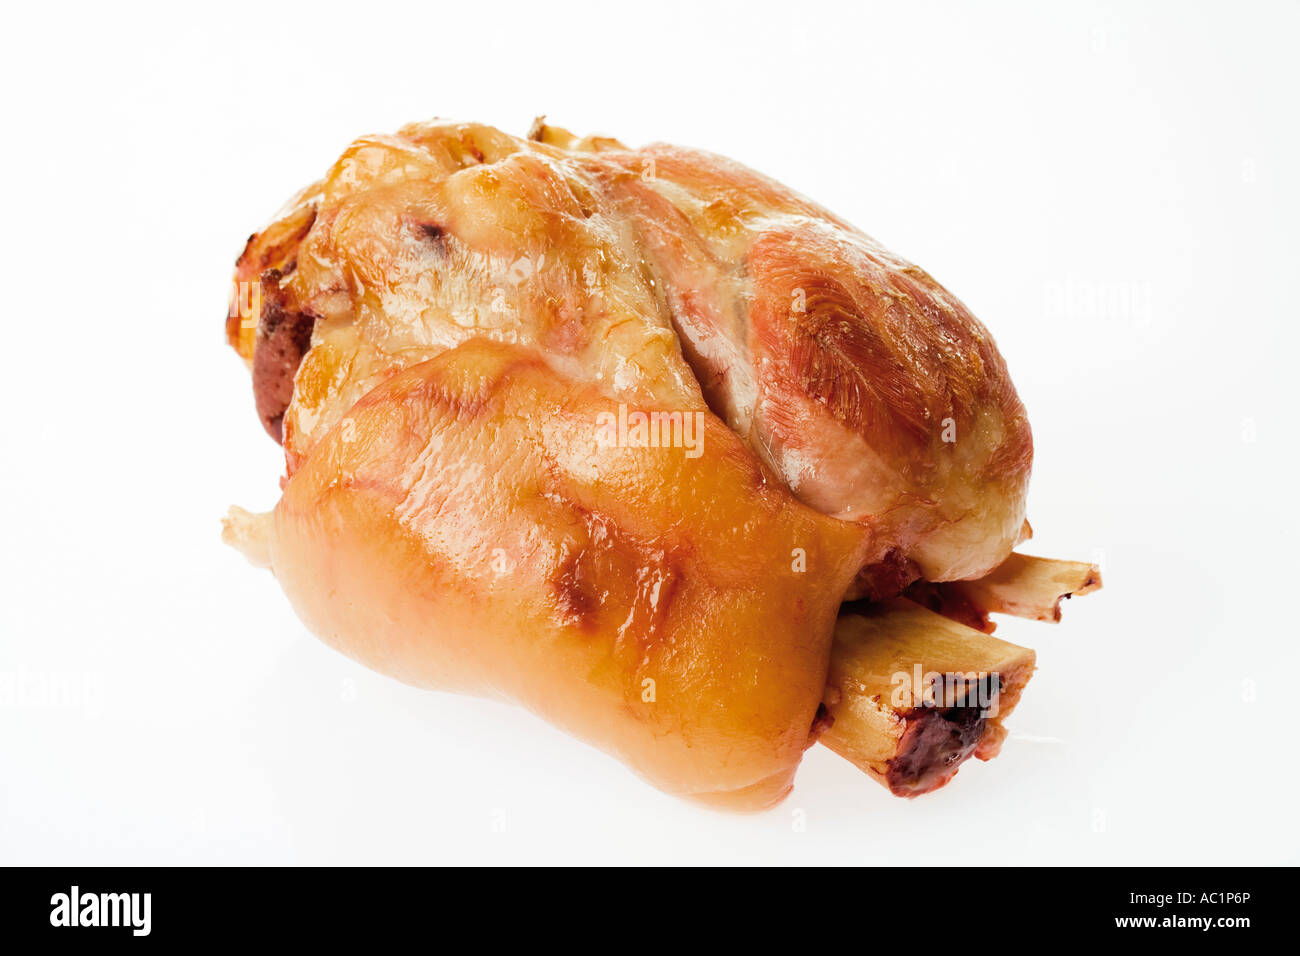 Knuckle of pork, close-up Stock Photo